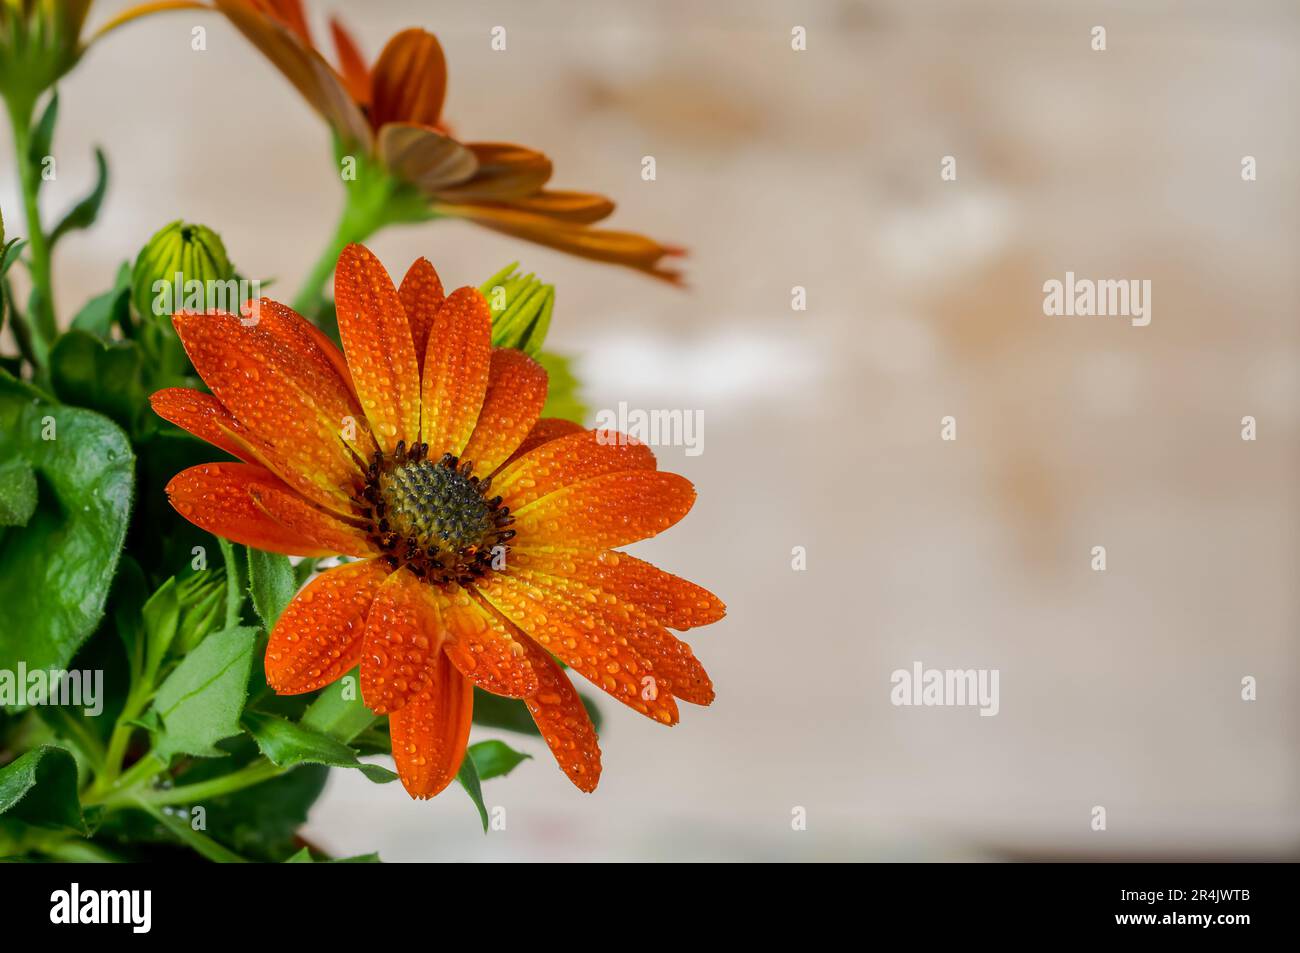 African daisy,Osteospermum,delicate flowers in warm sunny colors,two-colored orange petals,yellow petals with drops of water,a spectacular ornamental Stock Photo